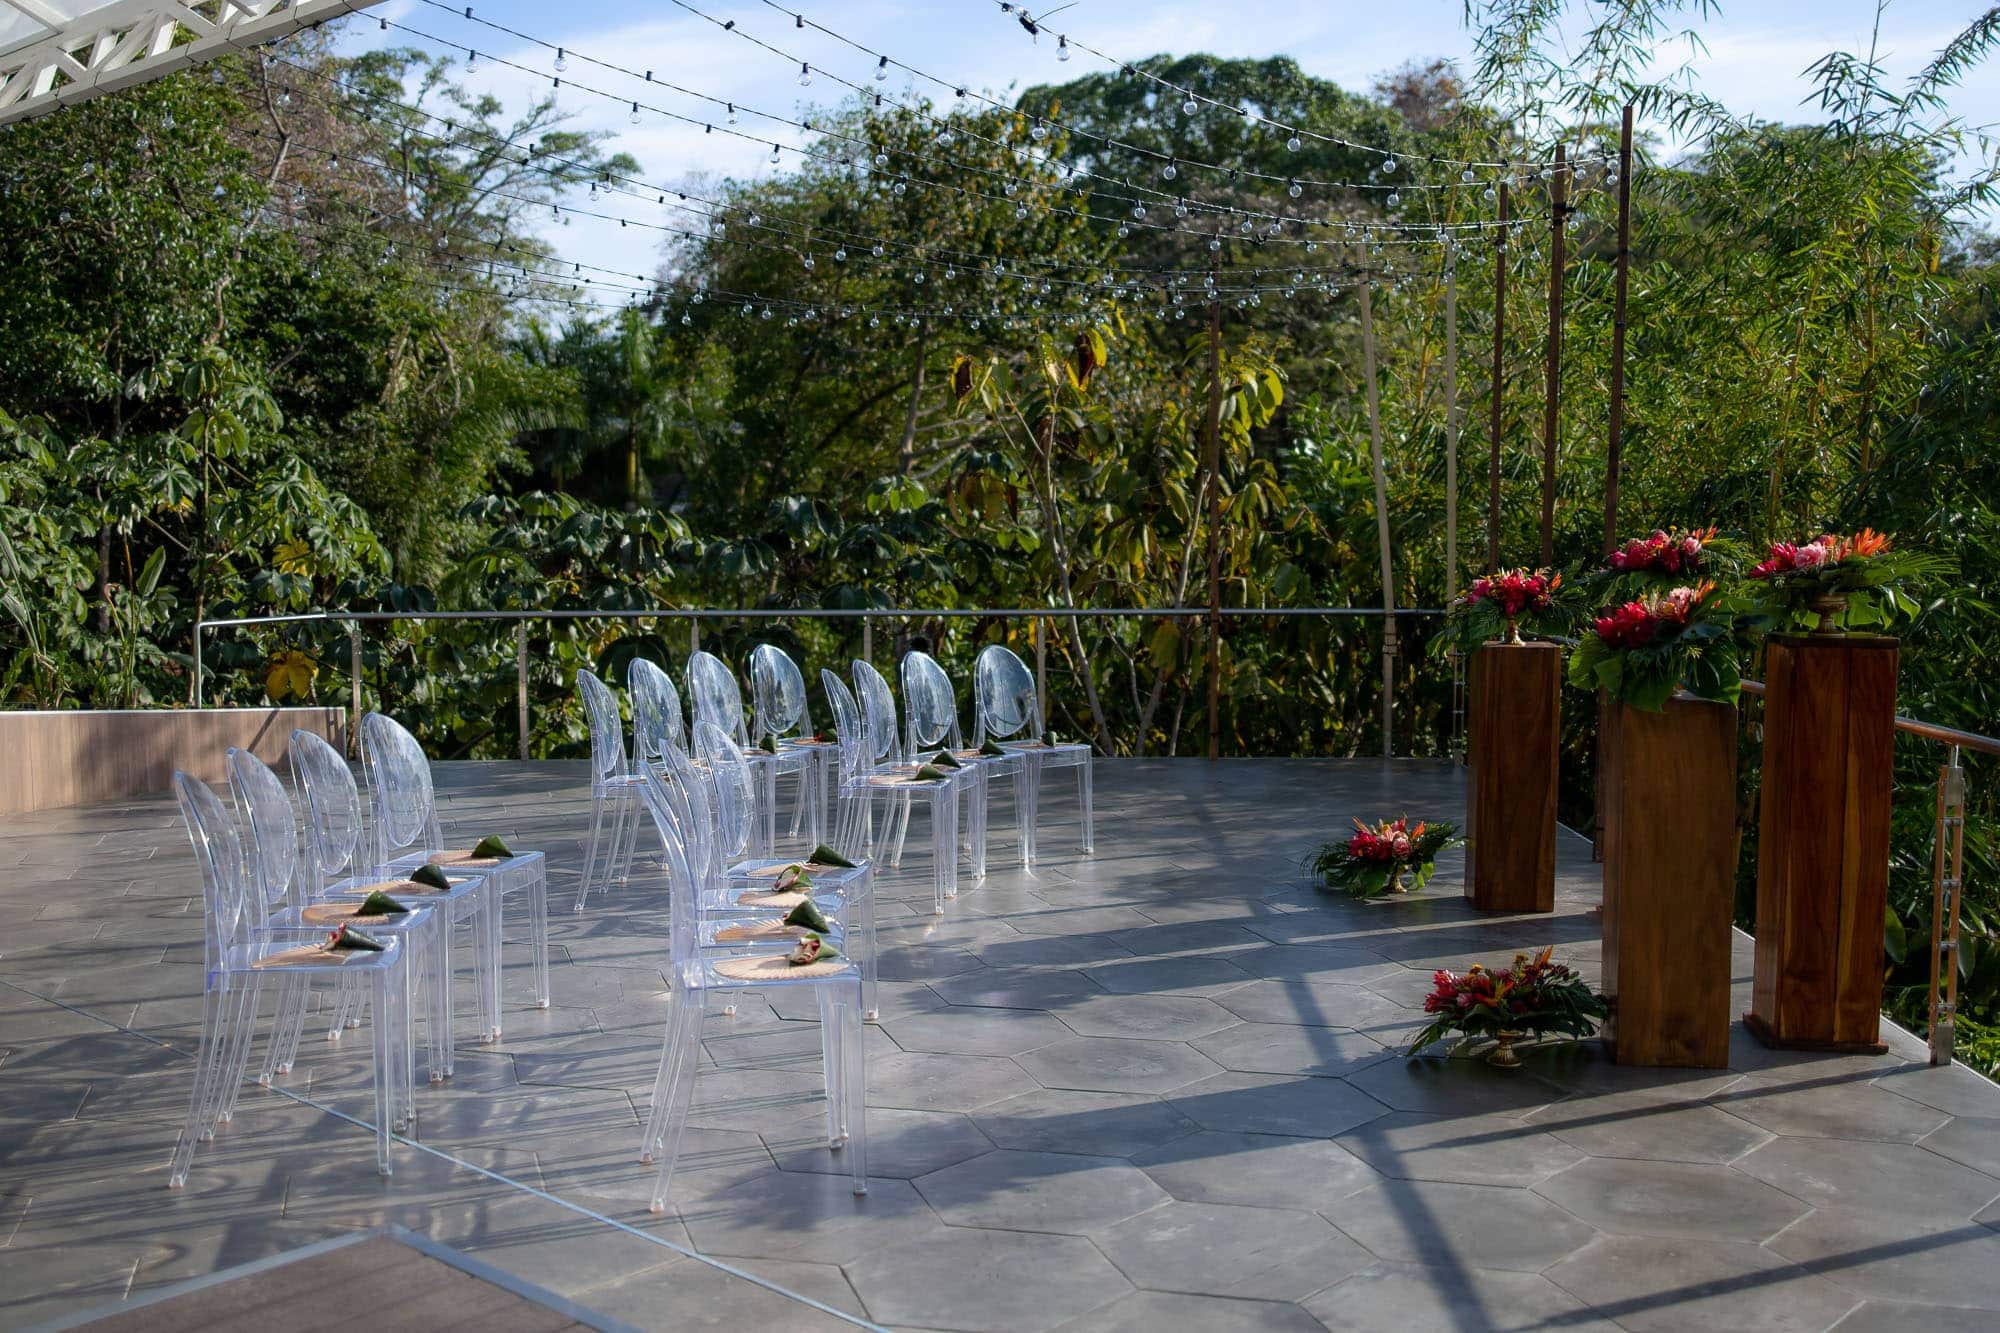 easy way to plan a wedding in Costa Rica: let the professionals decorate!